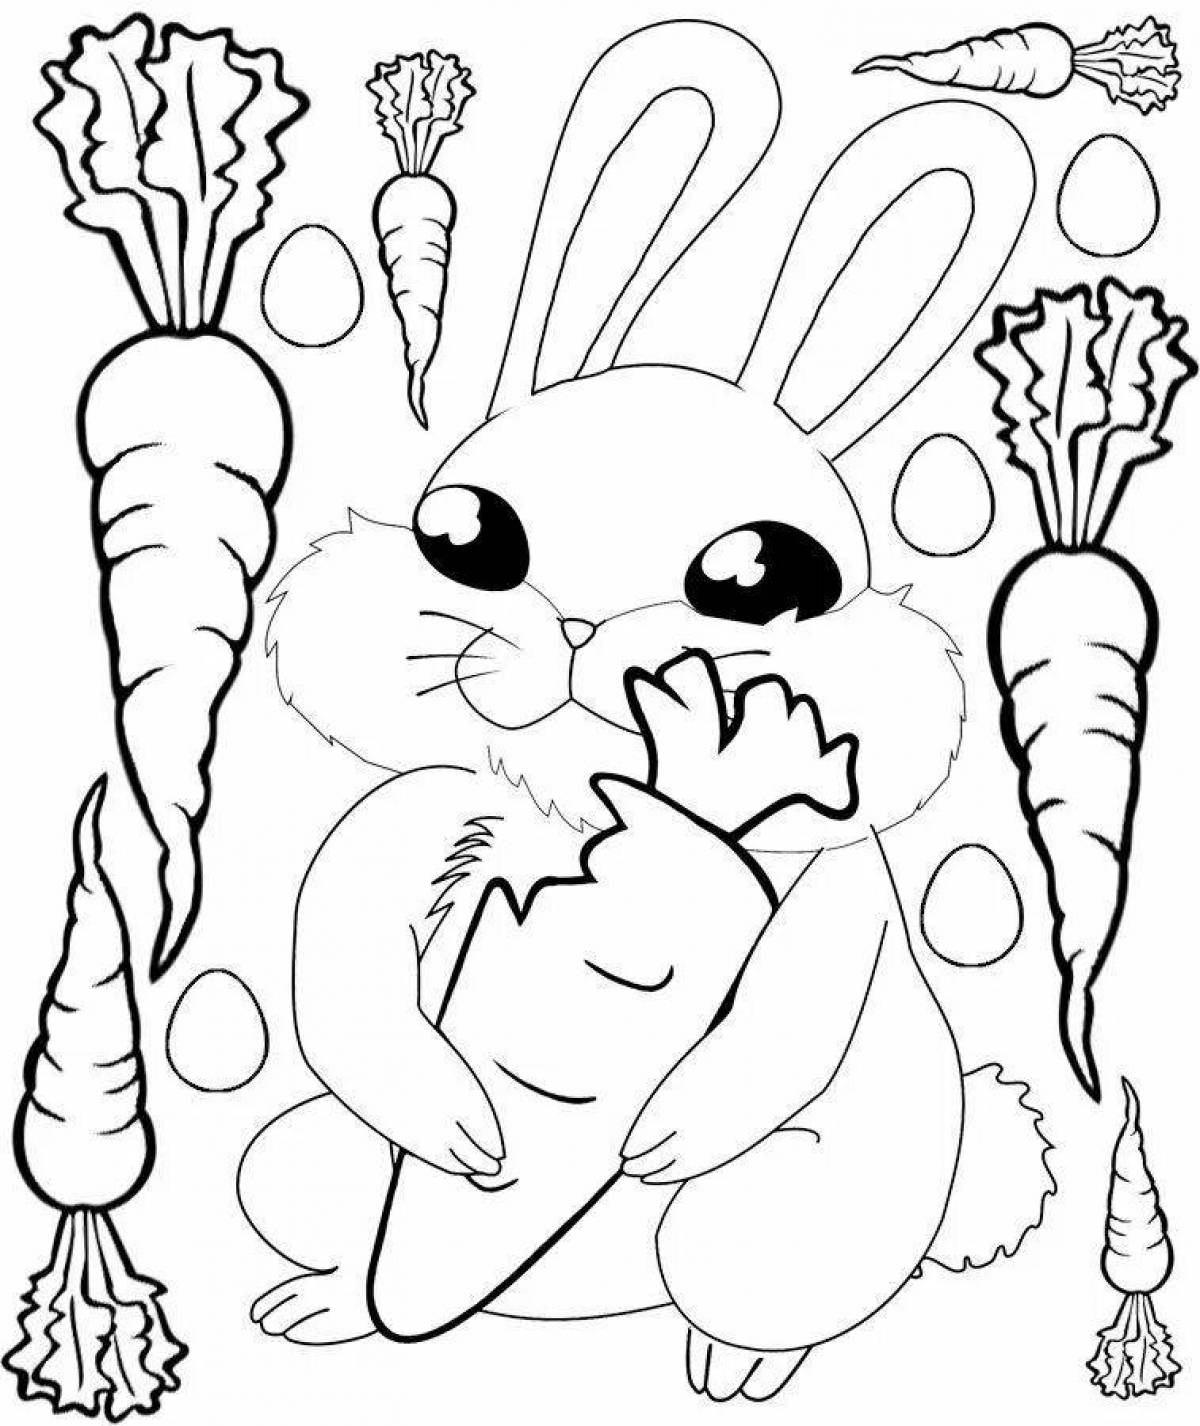 Joyful cat and hare coloring book